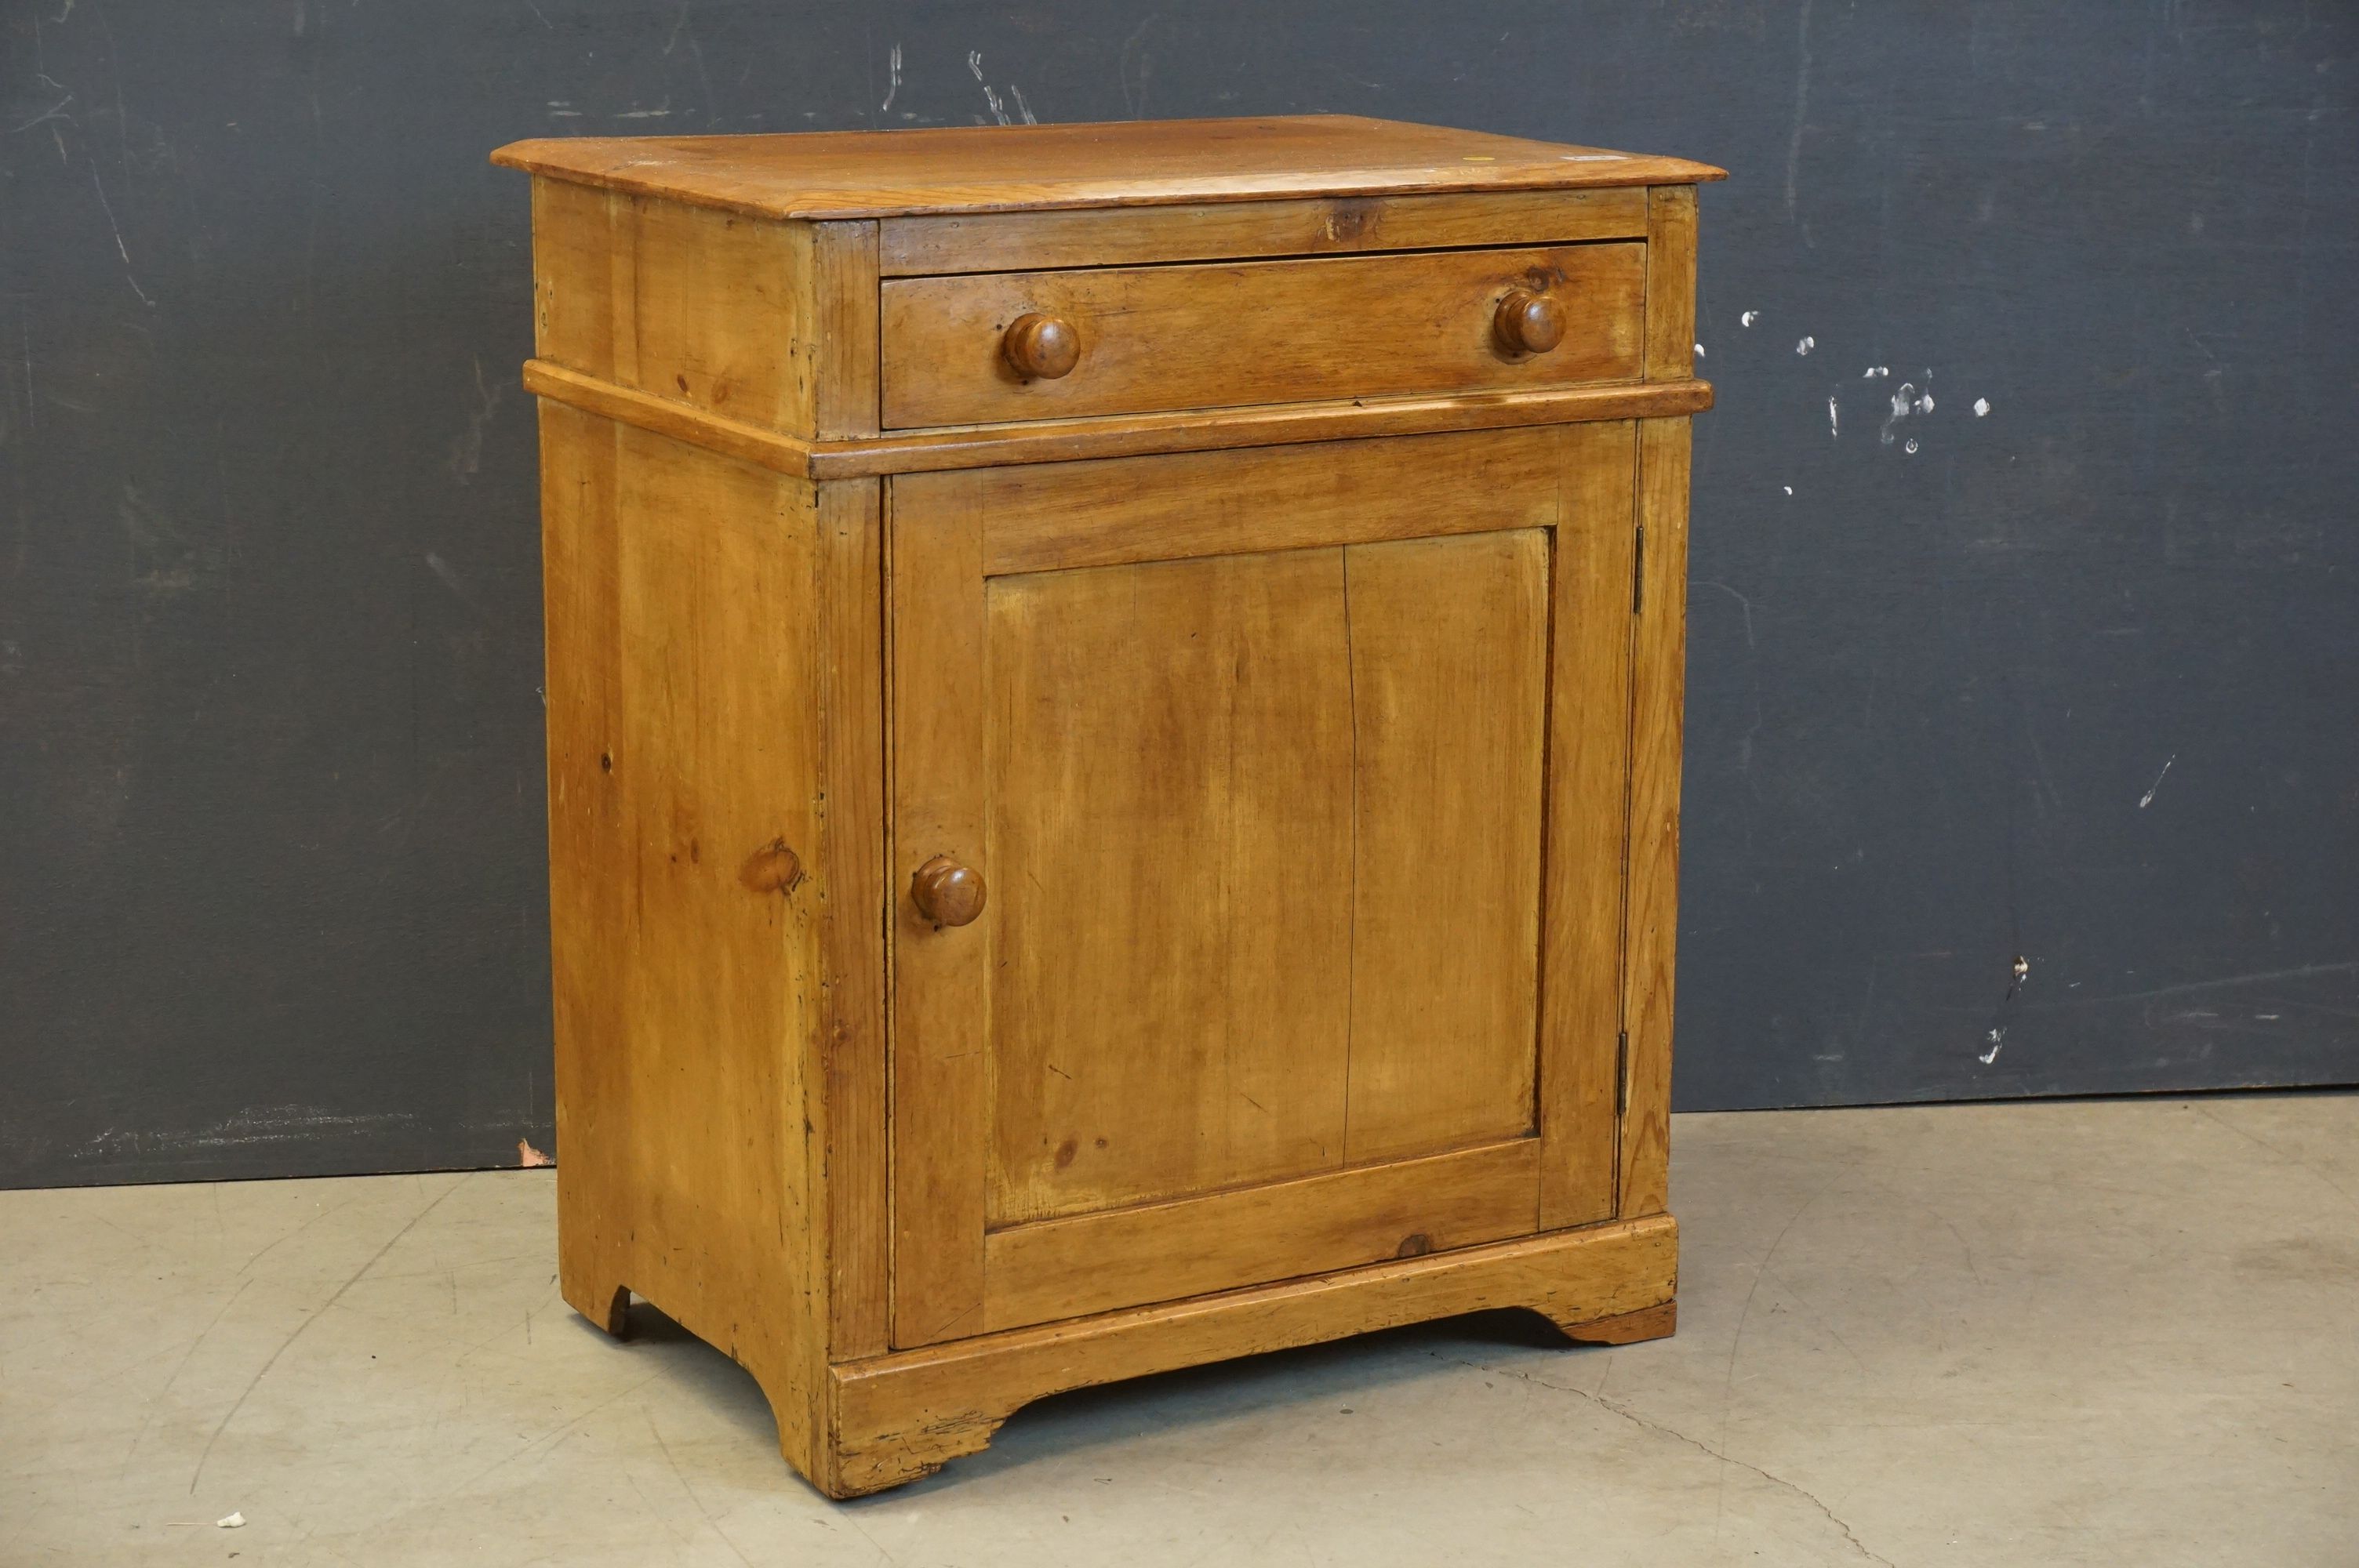 Victorian Pine Pot Cupboard with Drawer